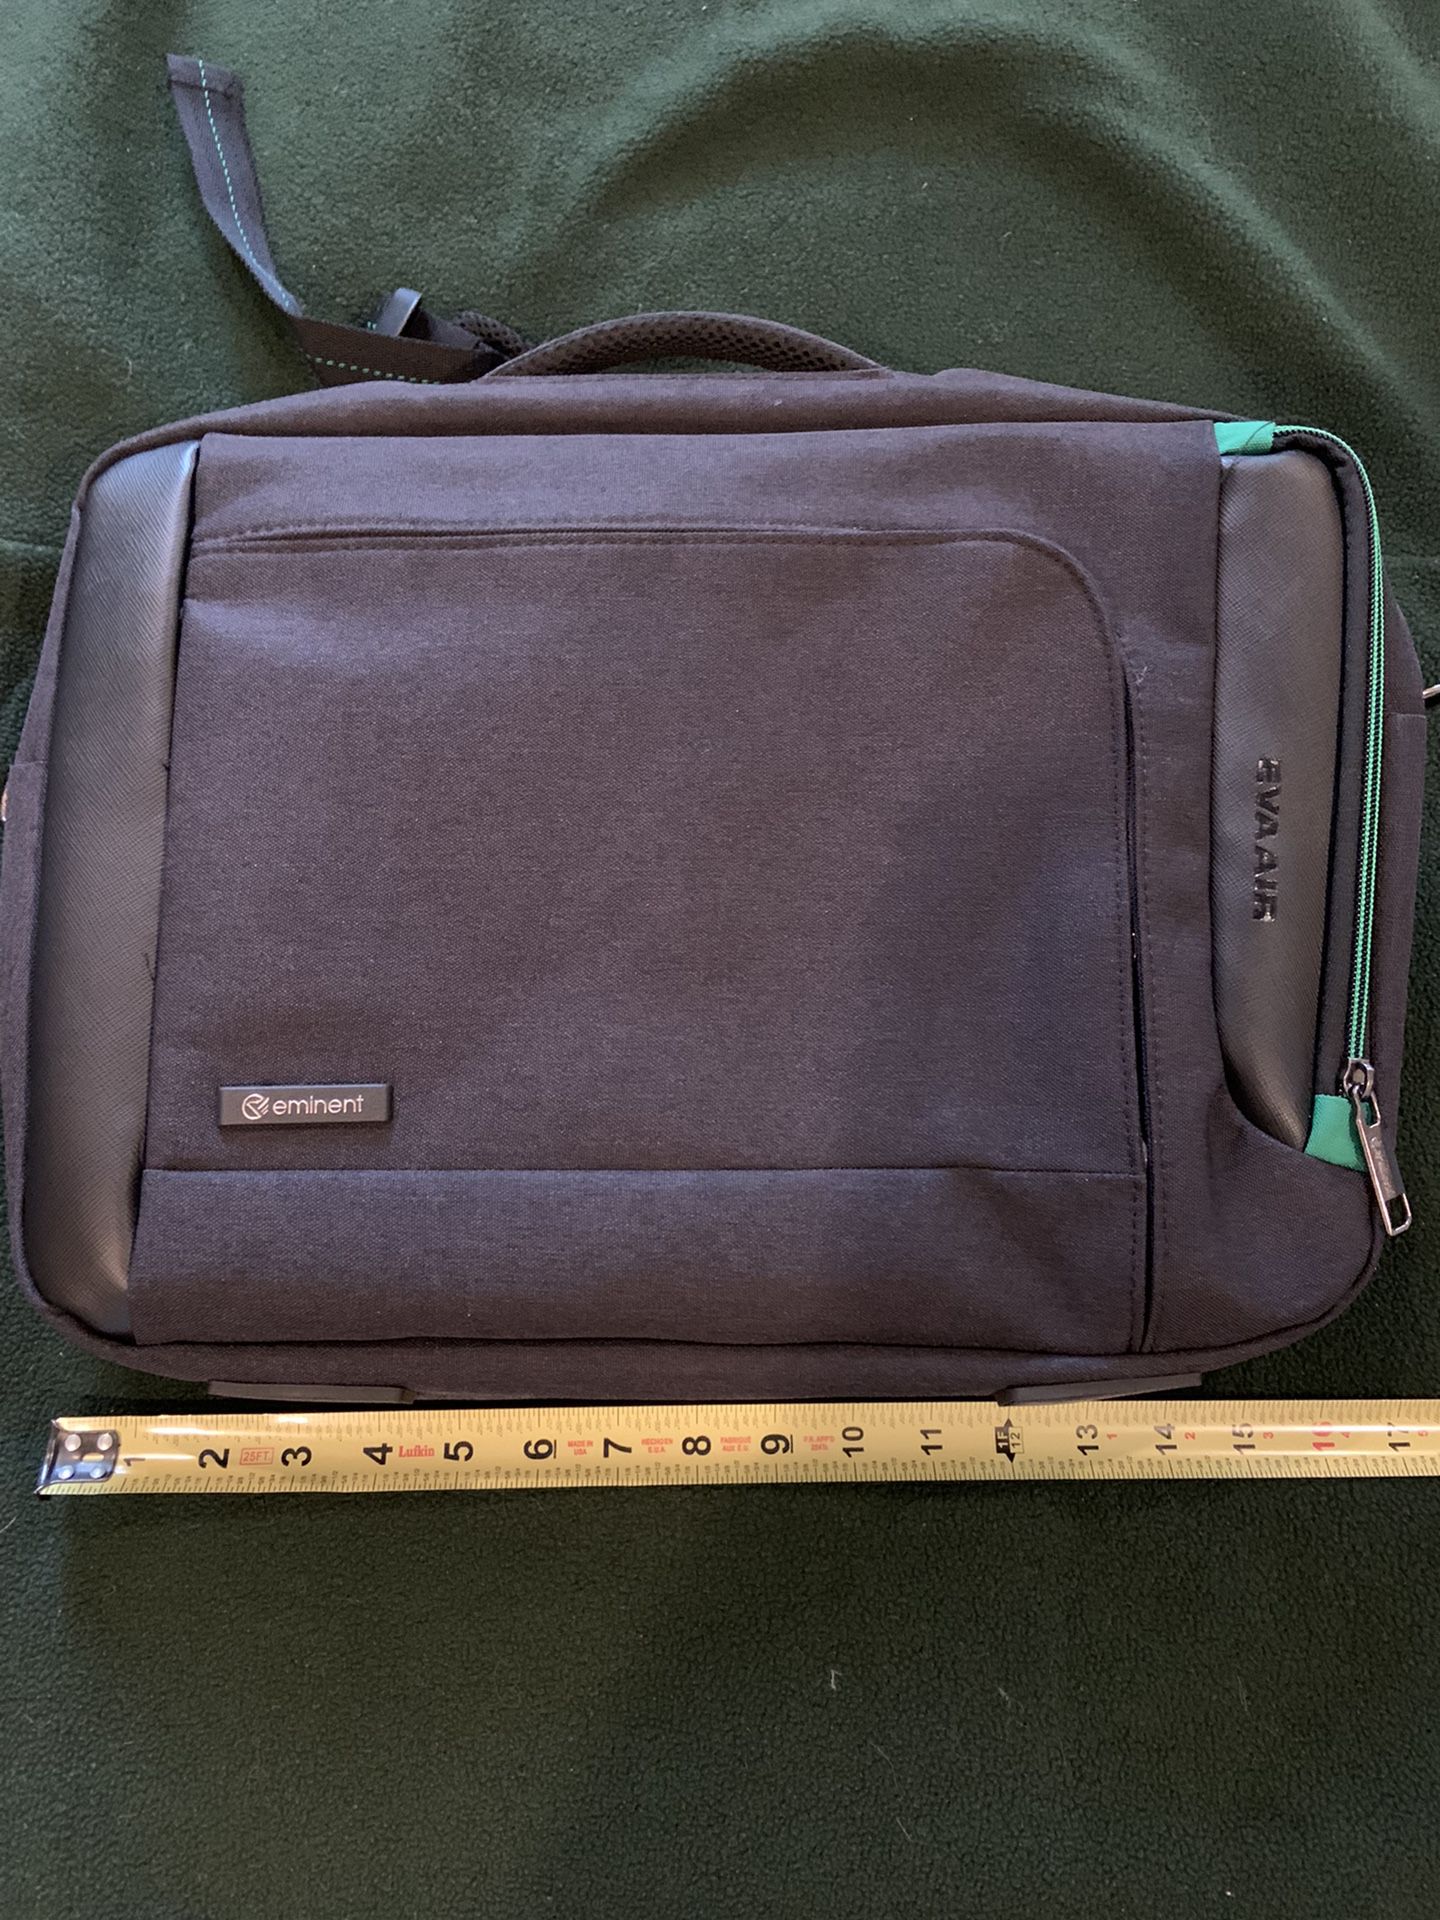 Computer Carry Case   